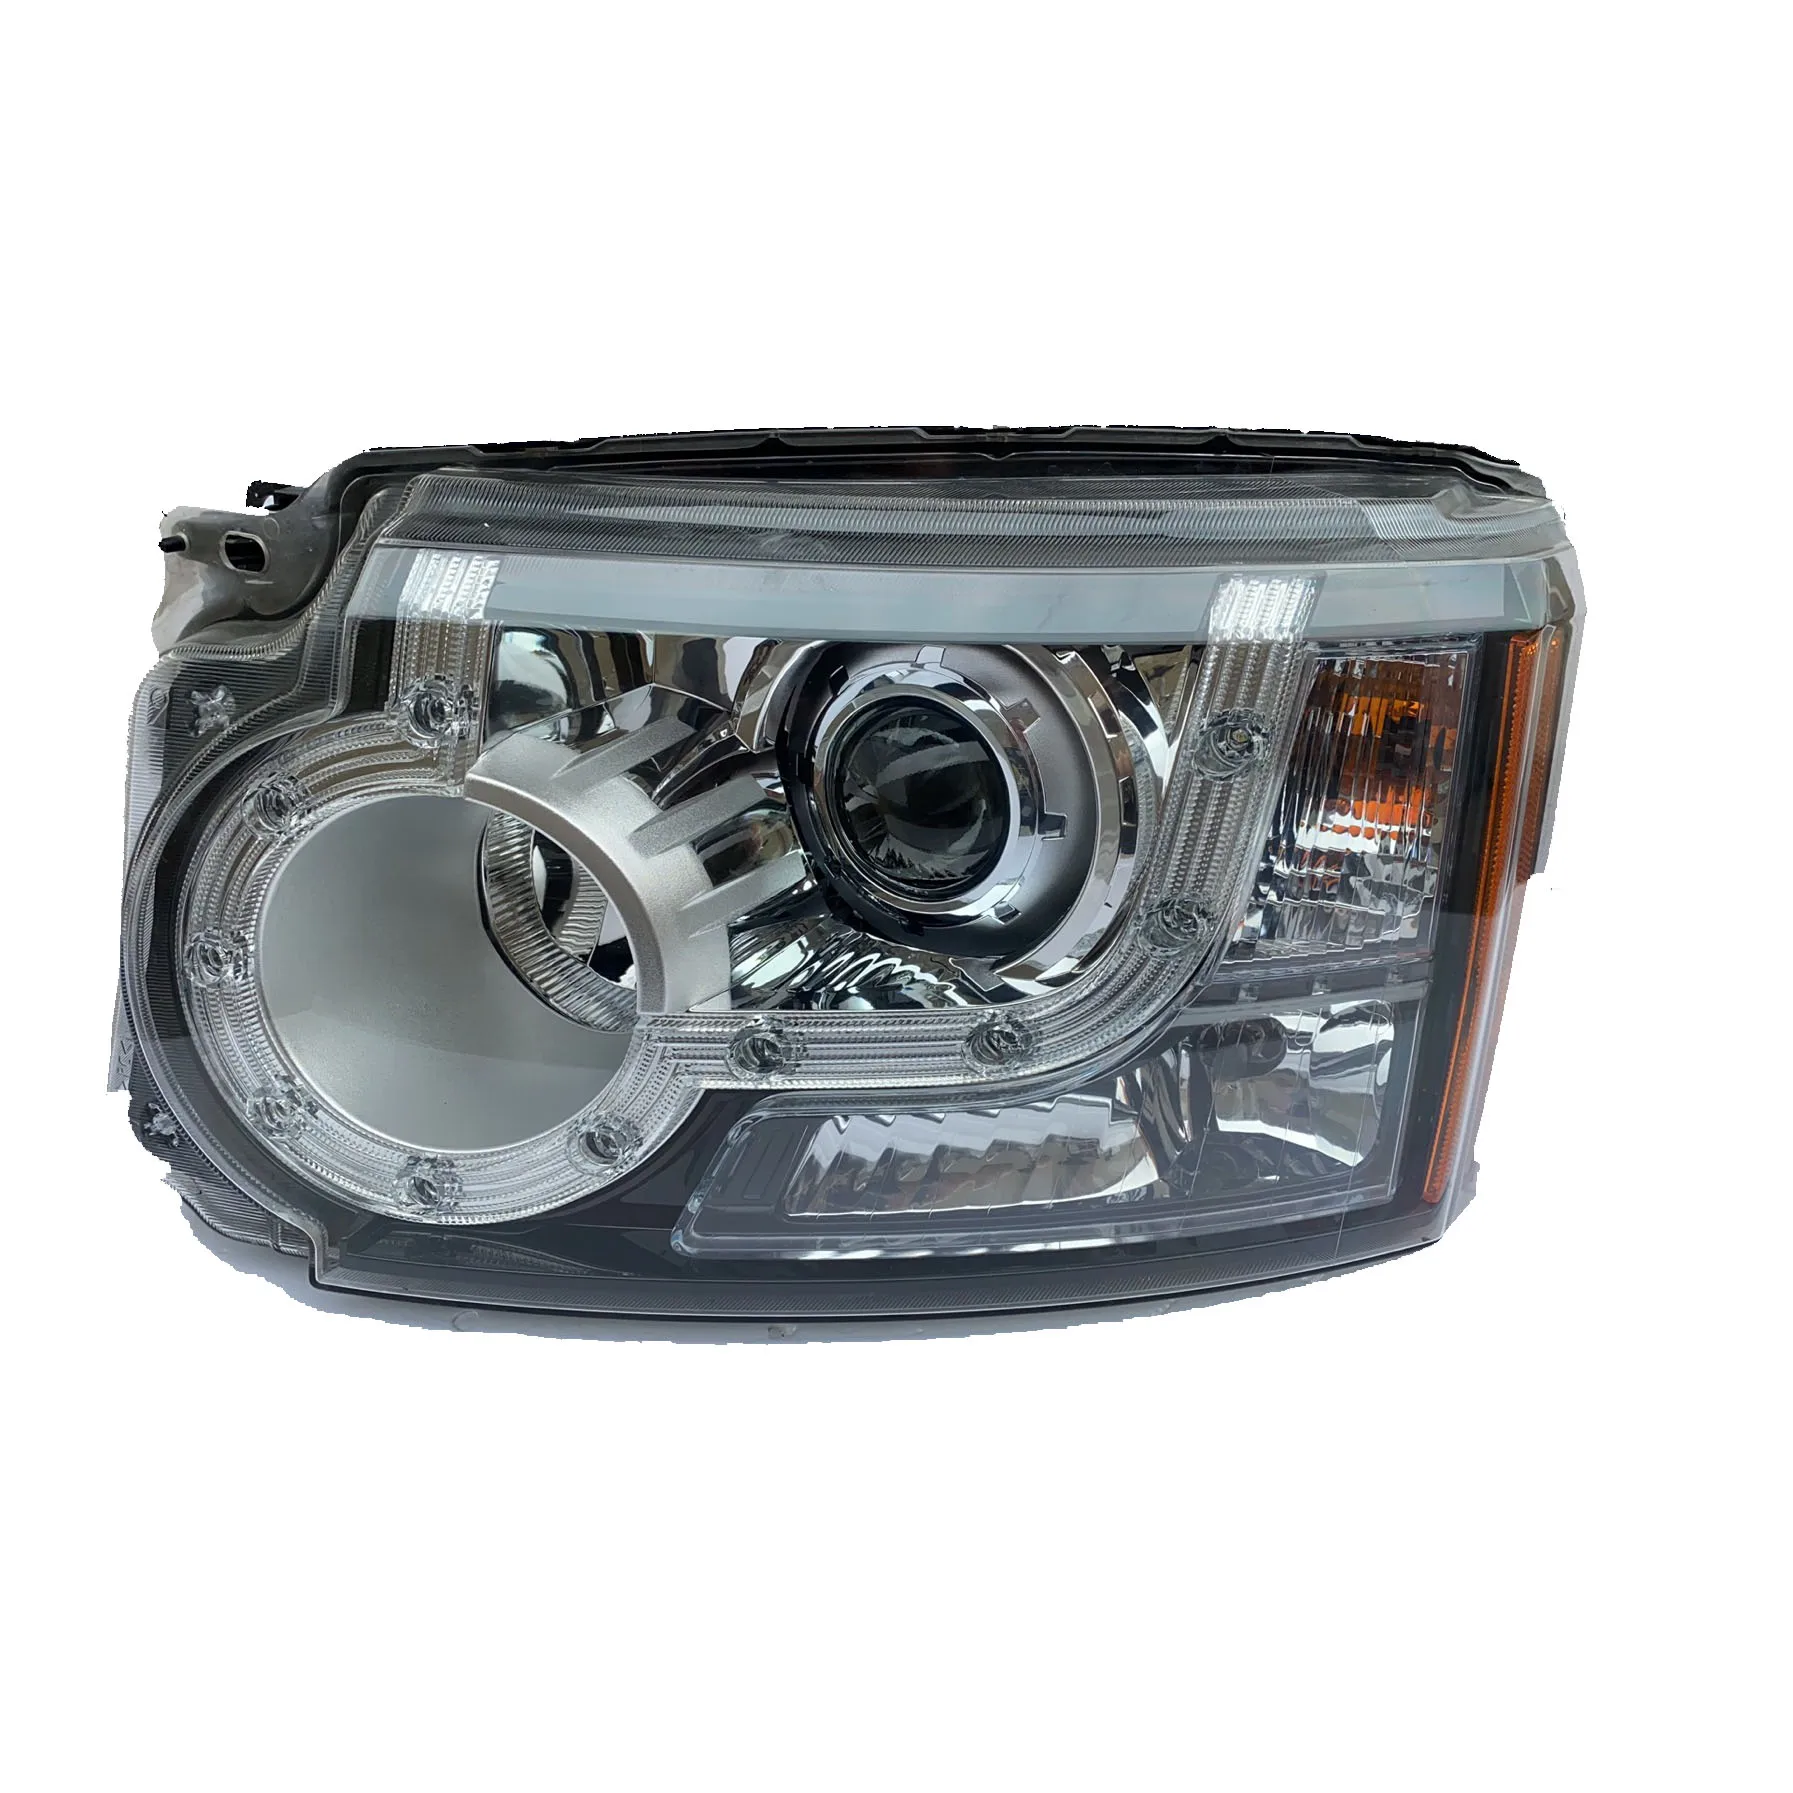 

Factory direct sales apply to the old-fashioned exploration 4 headlights high-quality automotive lighting system headlamps.